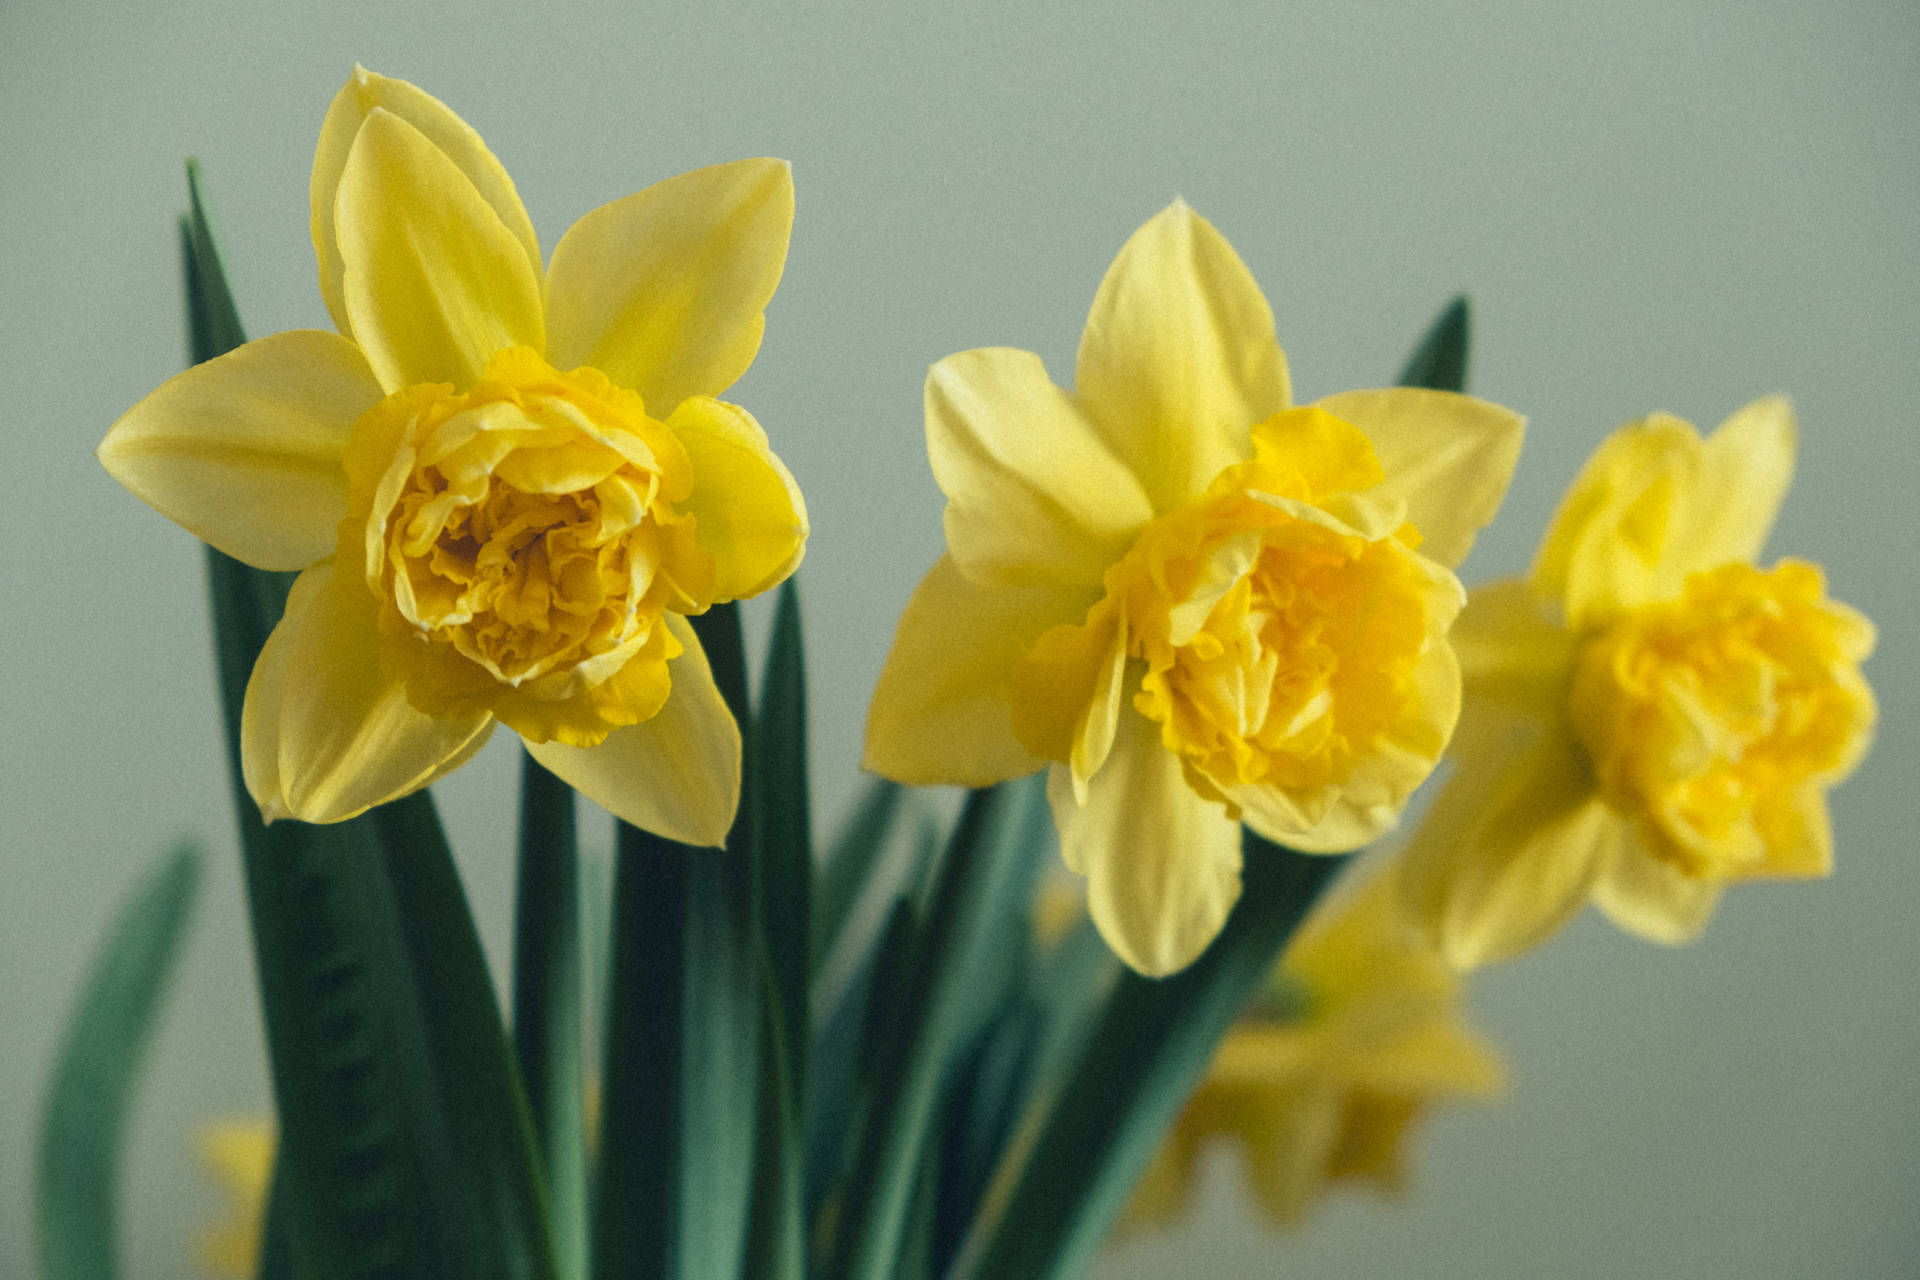 Daffodil Pictures  Download Free Images on Unsplash